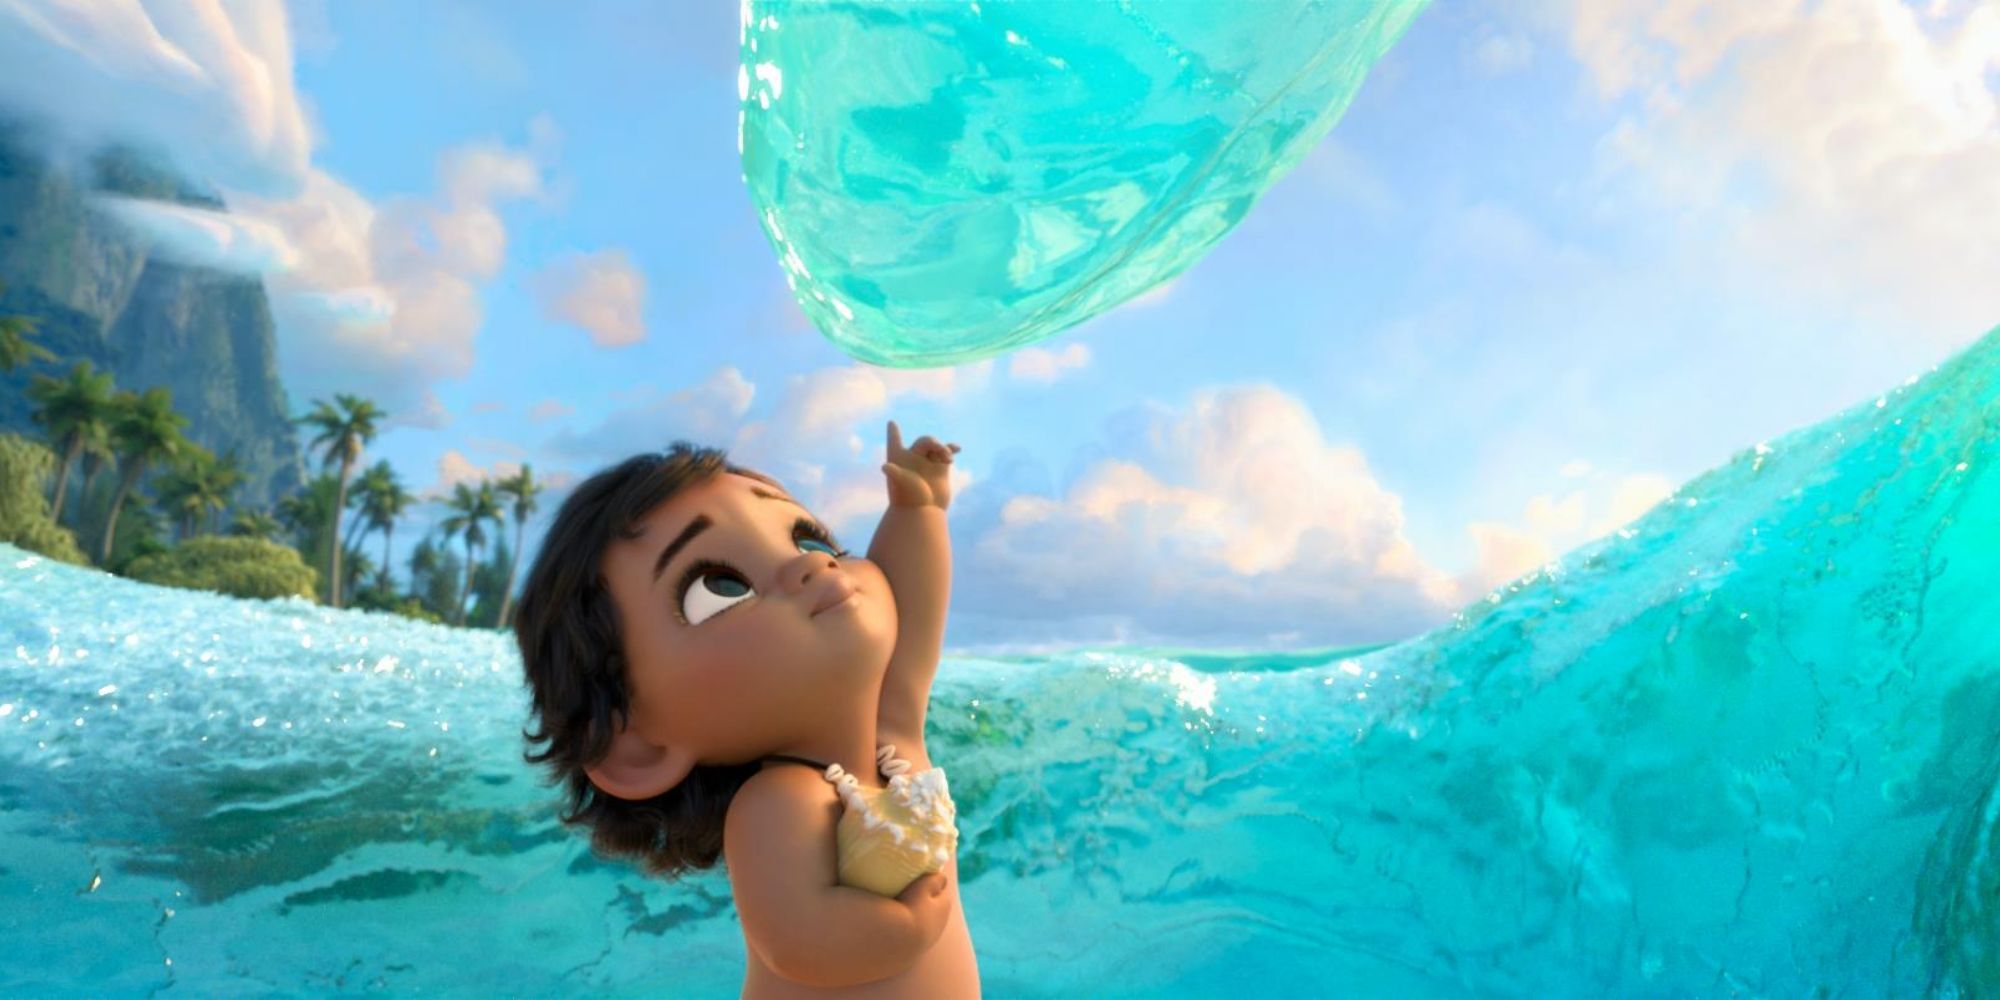 Moana as a baby reaching up to touch the ocean in Moana